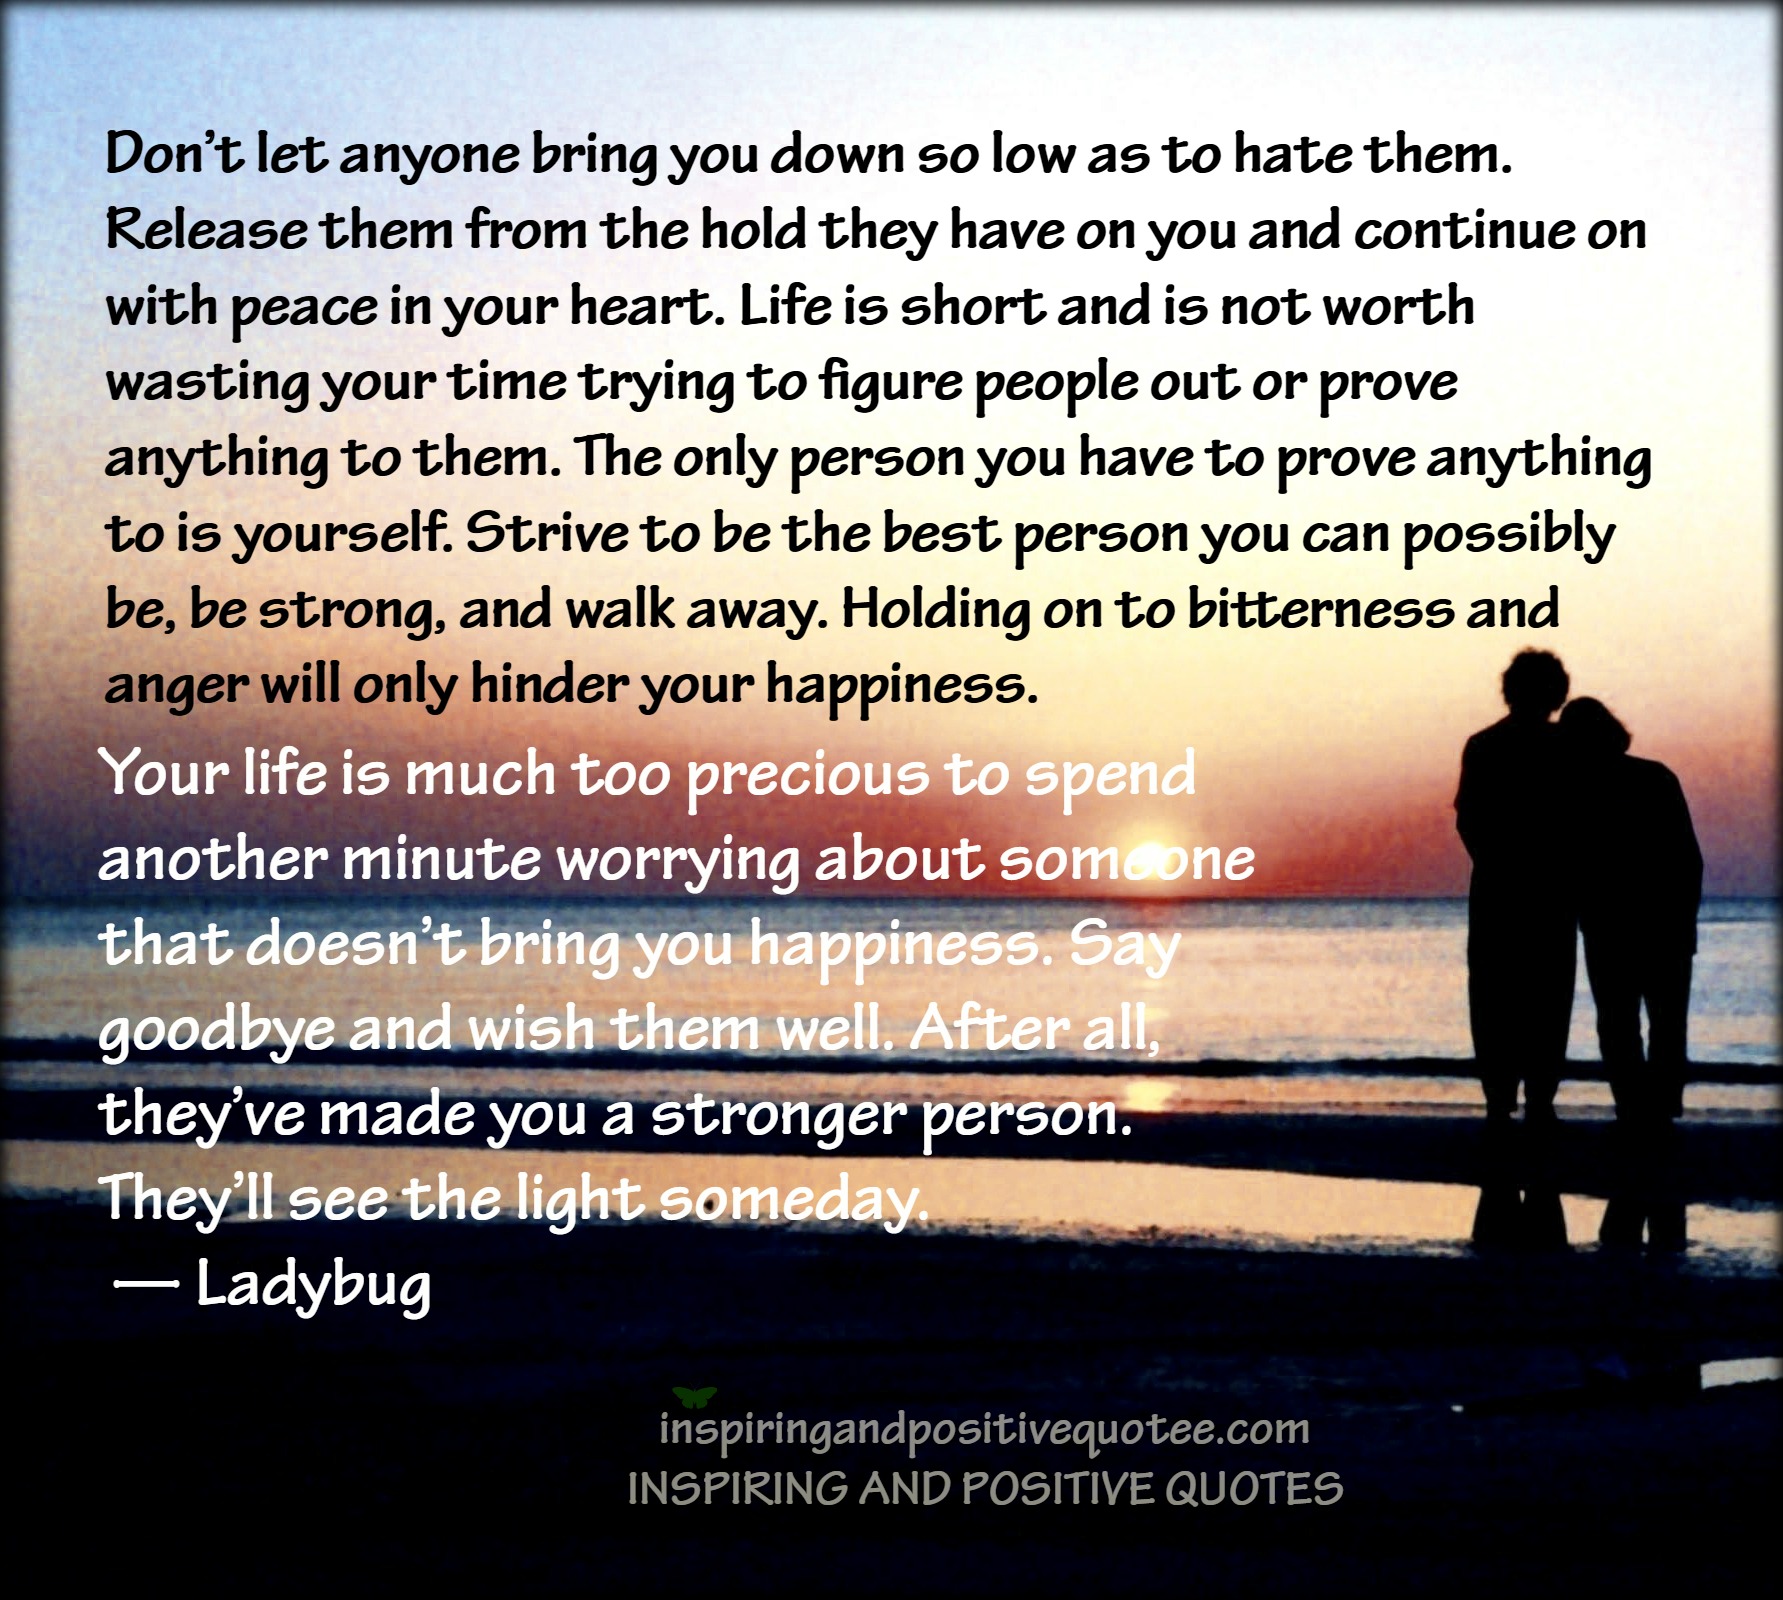 Don’t Let Anyone Bring You Down So Low As To Hate Them Inspiring And Positive Quotes